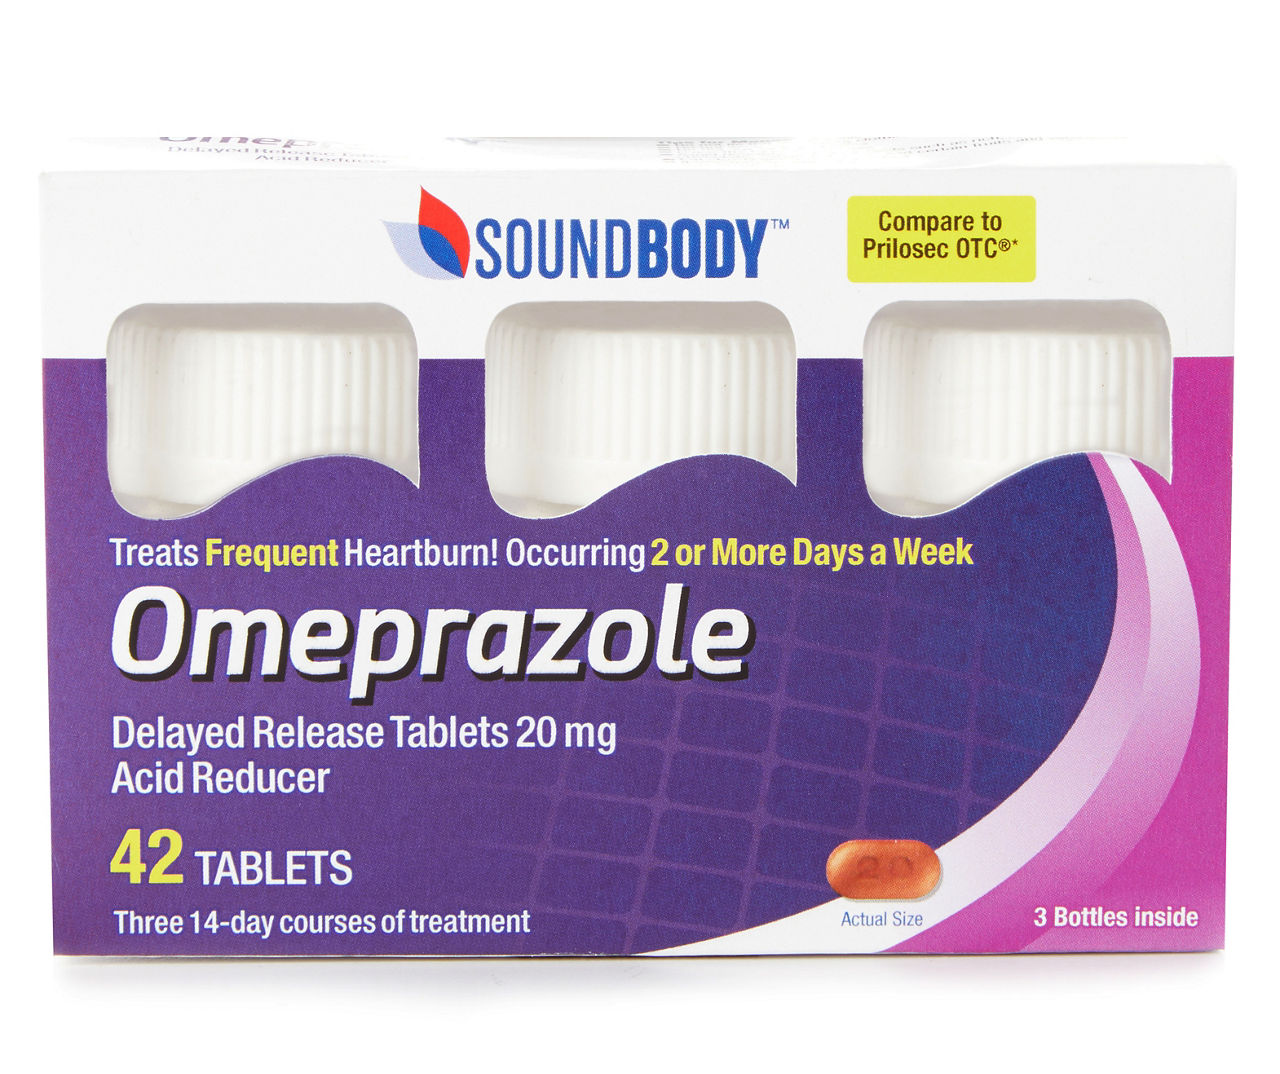 Walgreens Omeprazole Delayed Release Tablets 20 mg, Acid Reducer 42 ct